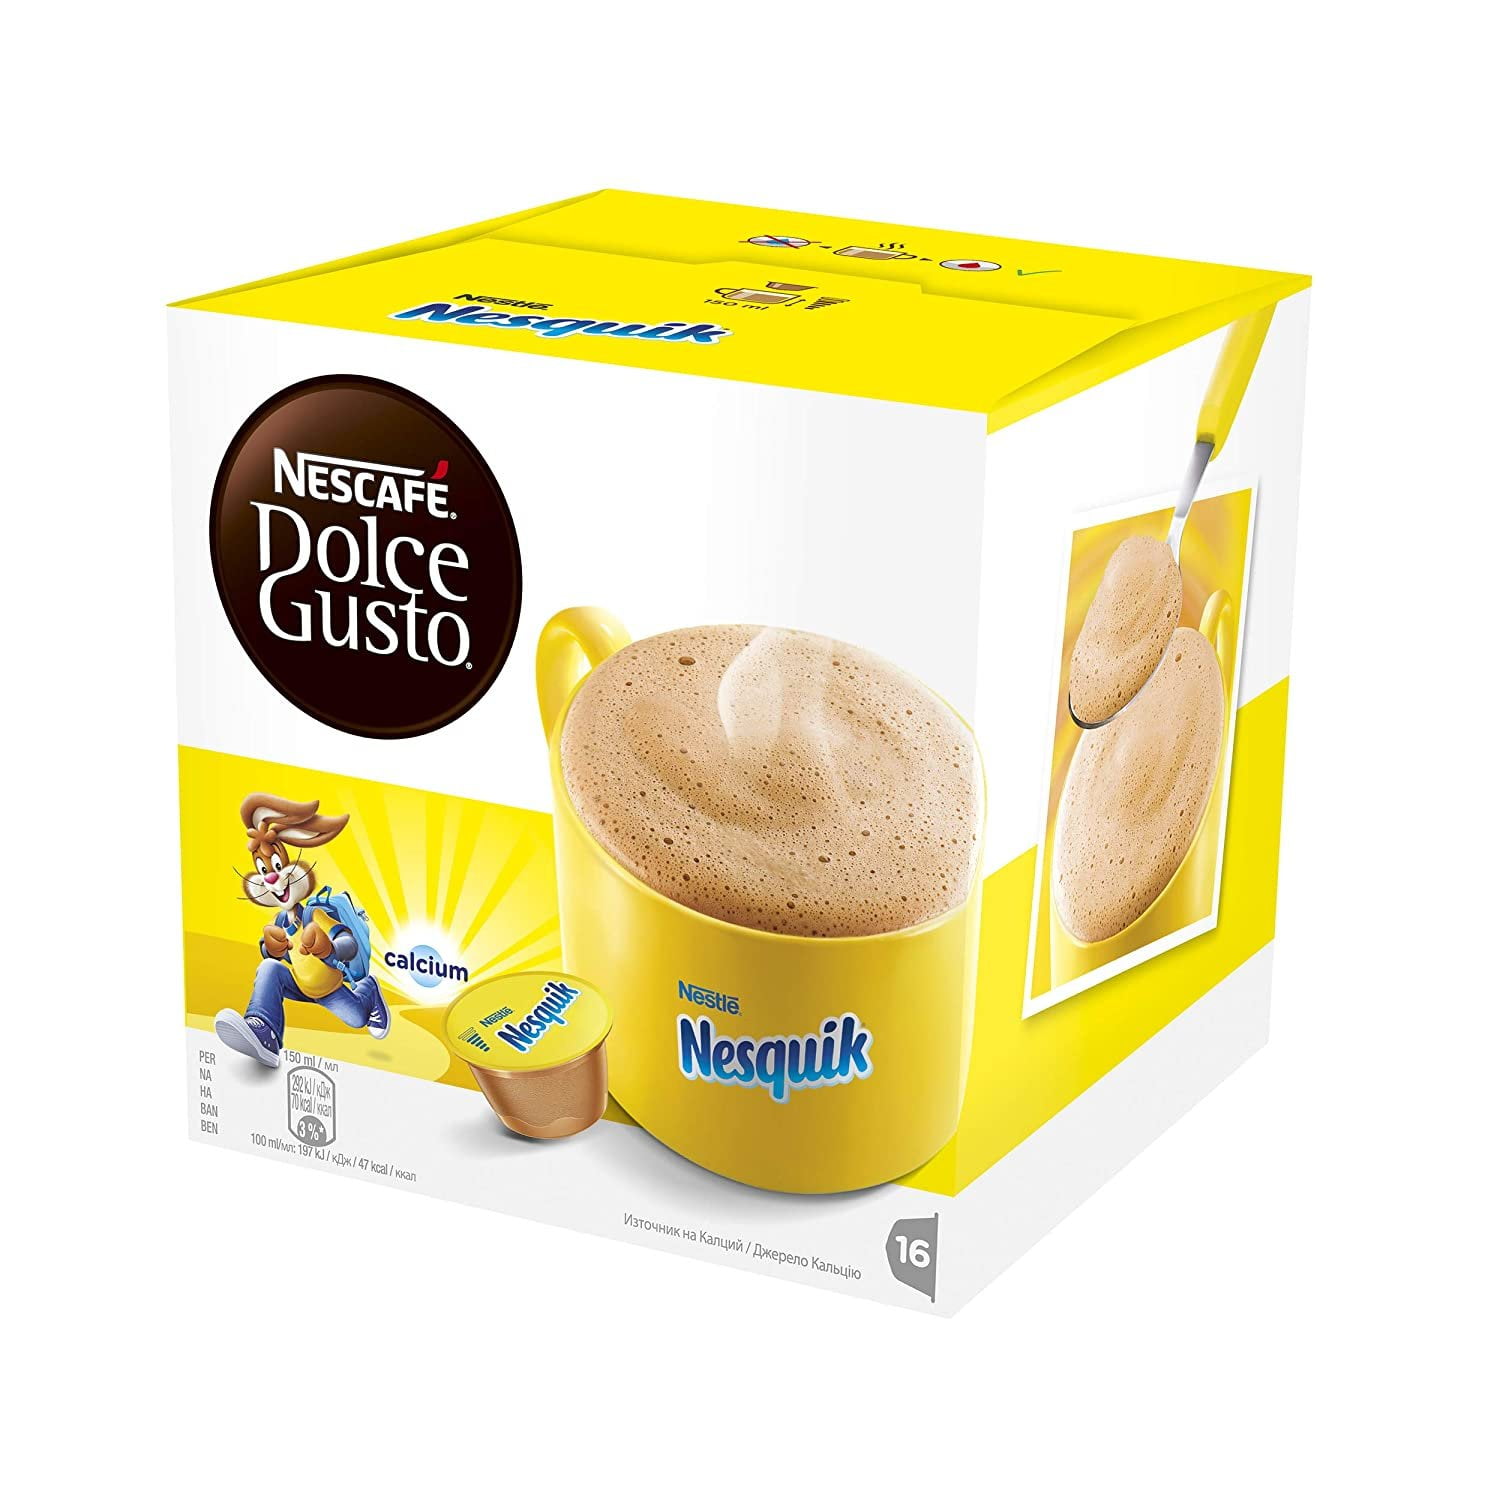 Explore our selection of 32x Nescafe Dolce Gusto Chococino Pods (2 Boxes of  16 Pods) Dolce Gusto to help you be your best